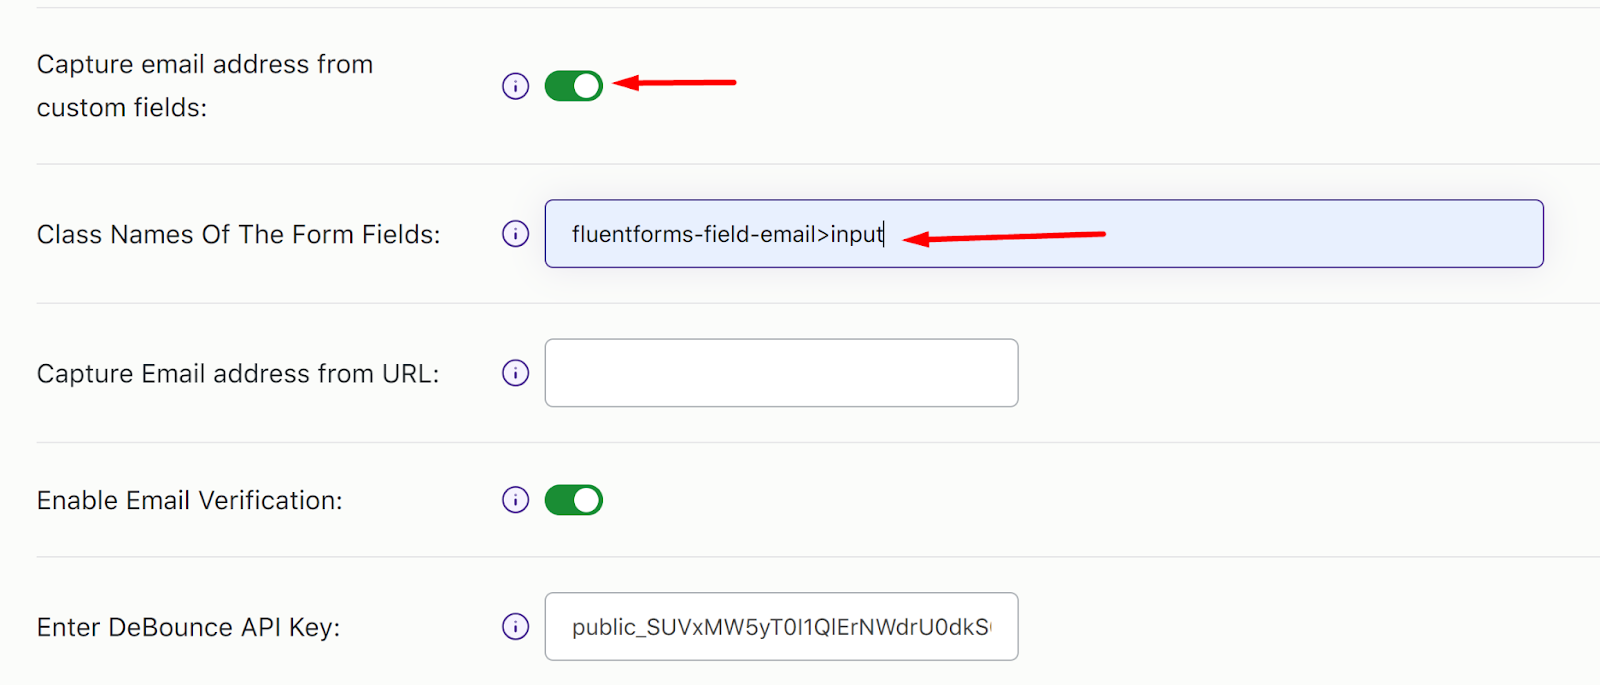 How to Capture Email Address from Custom Fields in WooCommerce Abandoned Cart plugin? - Tyche Softwares